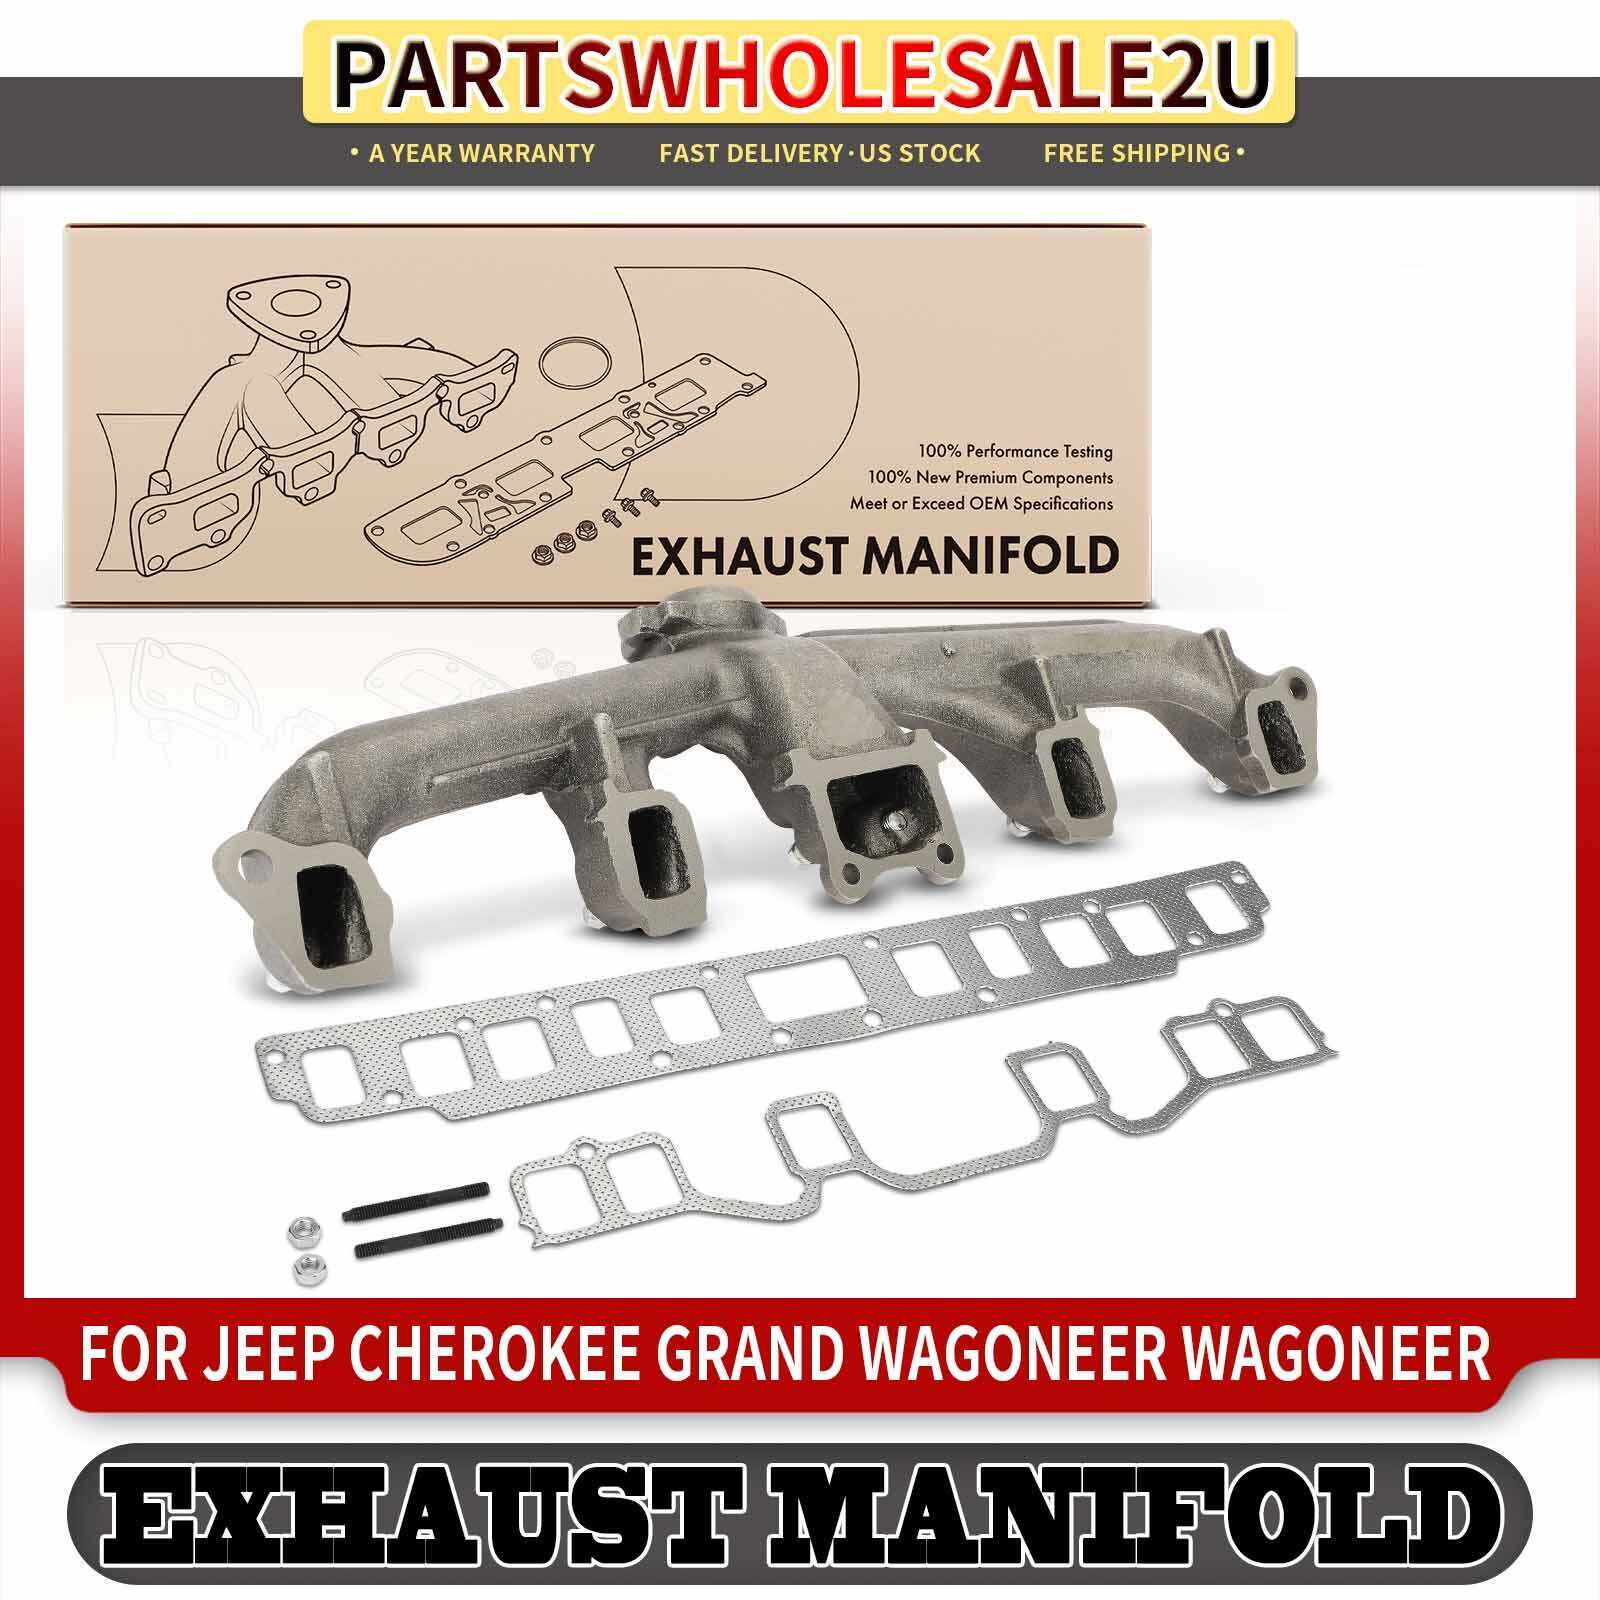 New Exhaust Manifold with Gasket for Jeep Cherokee Grand Wagoneer J10 AMC Eagle